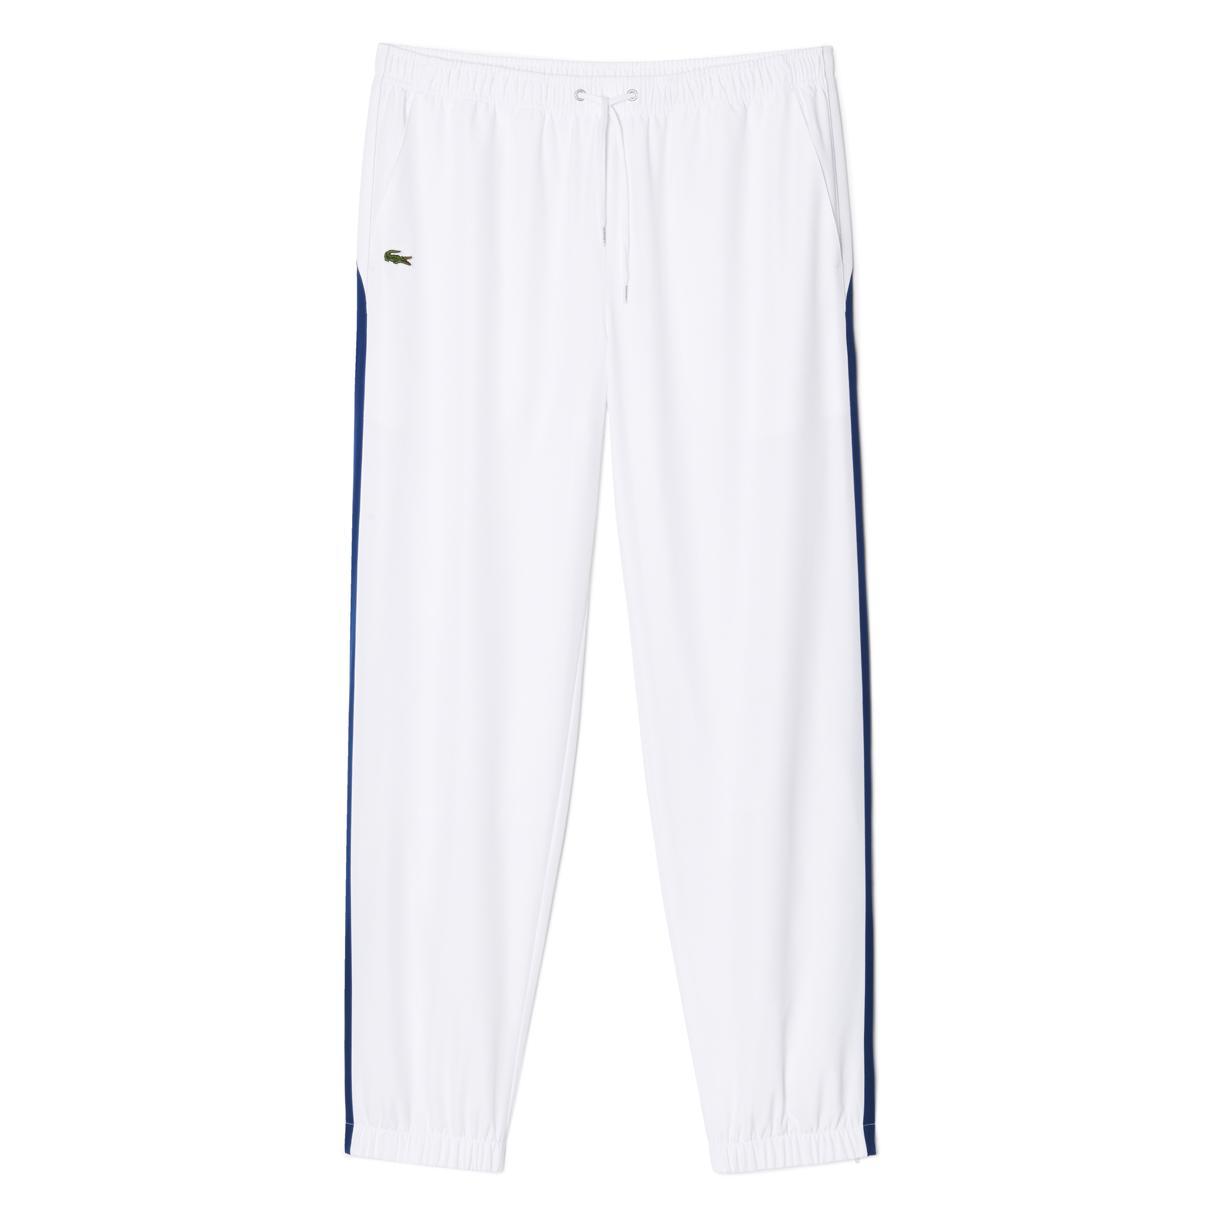 lacoste track pants white